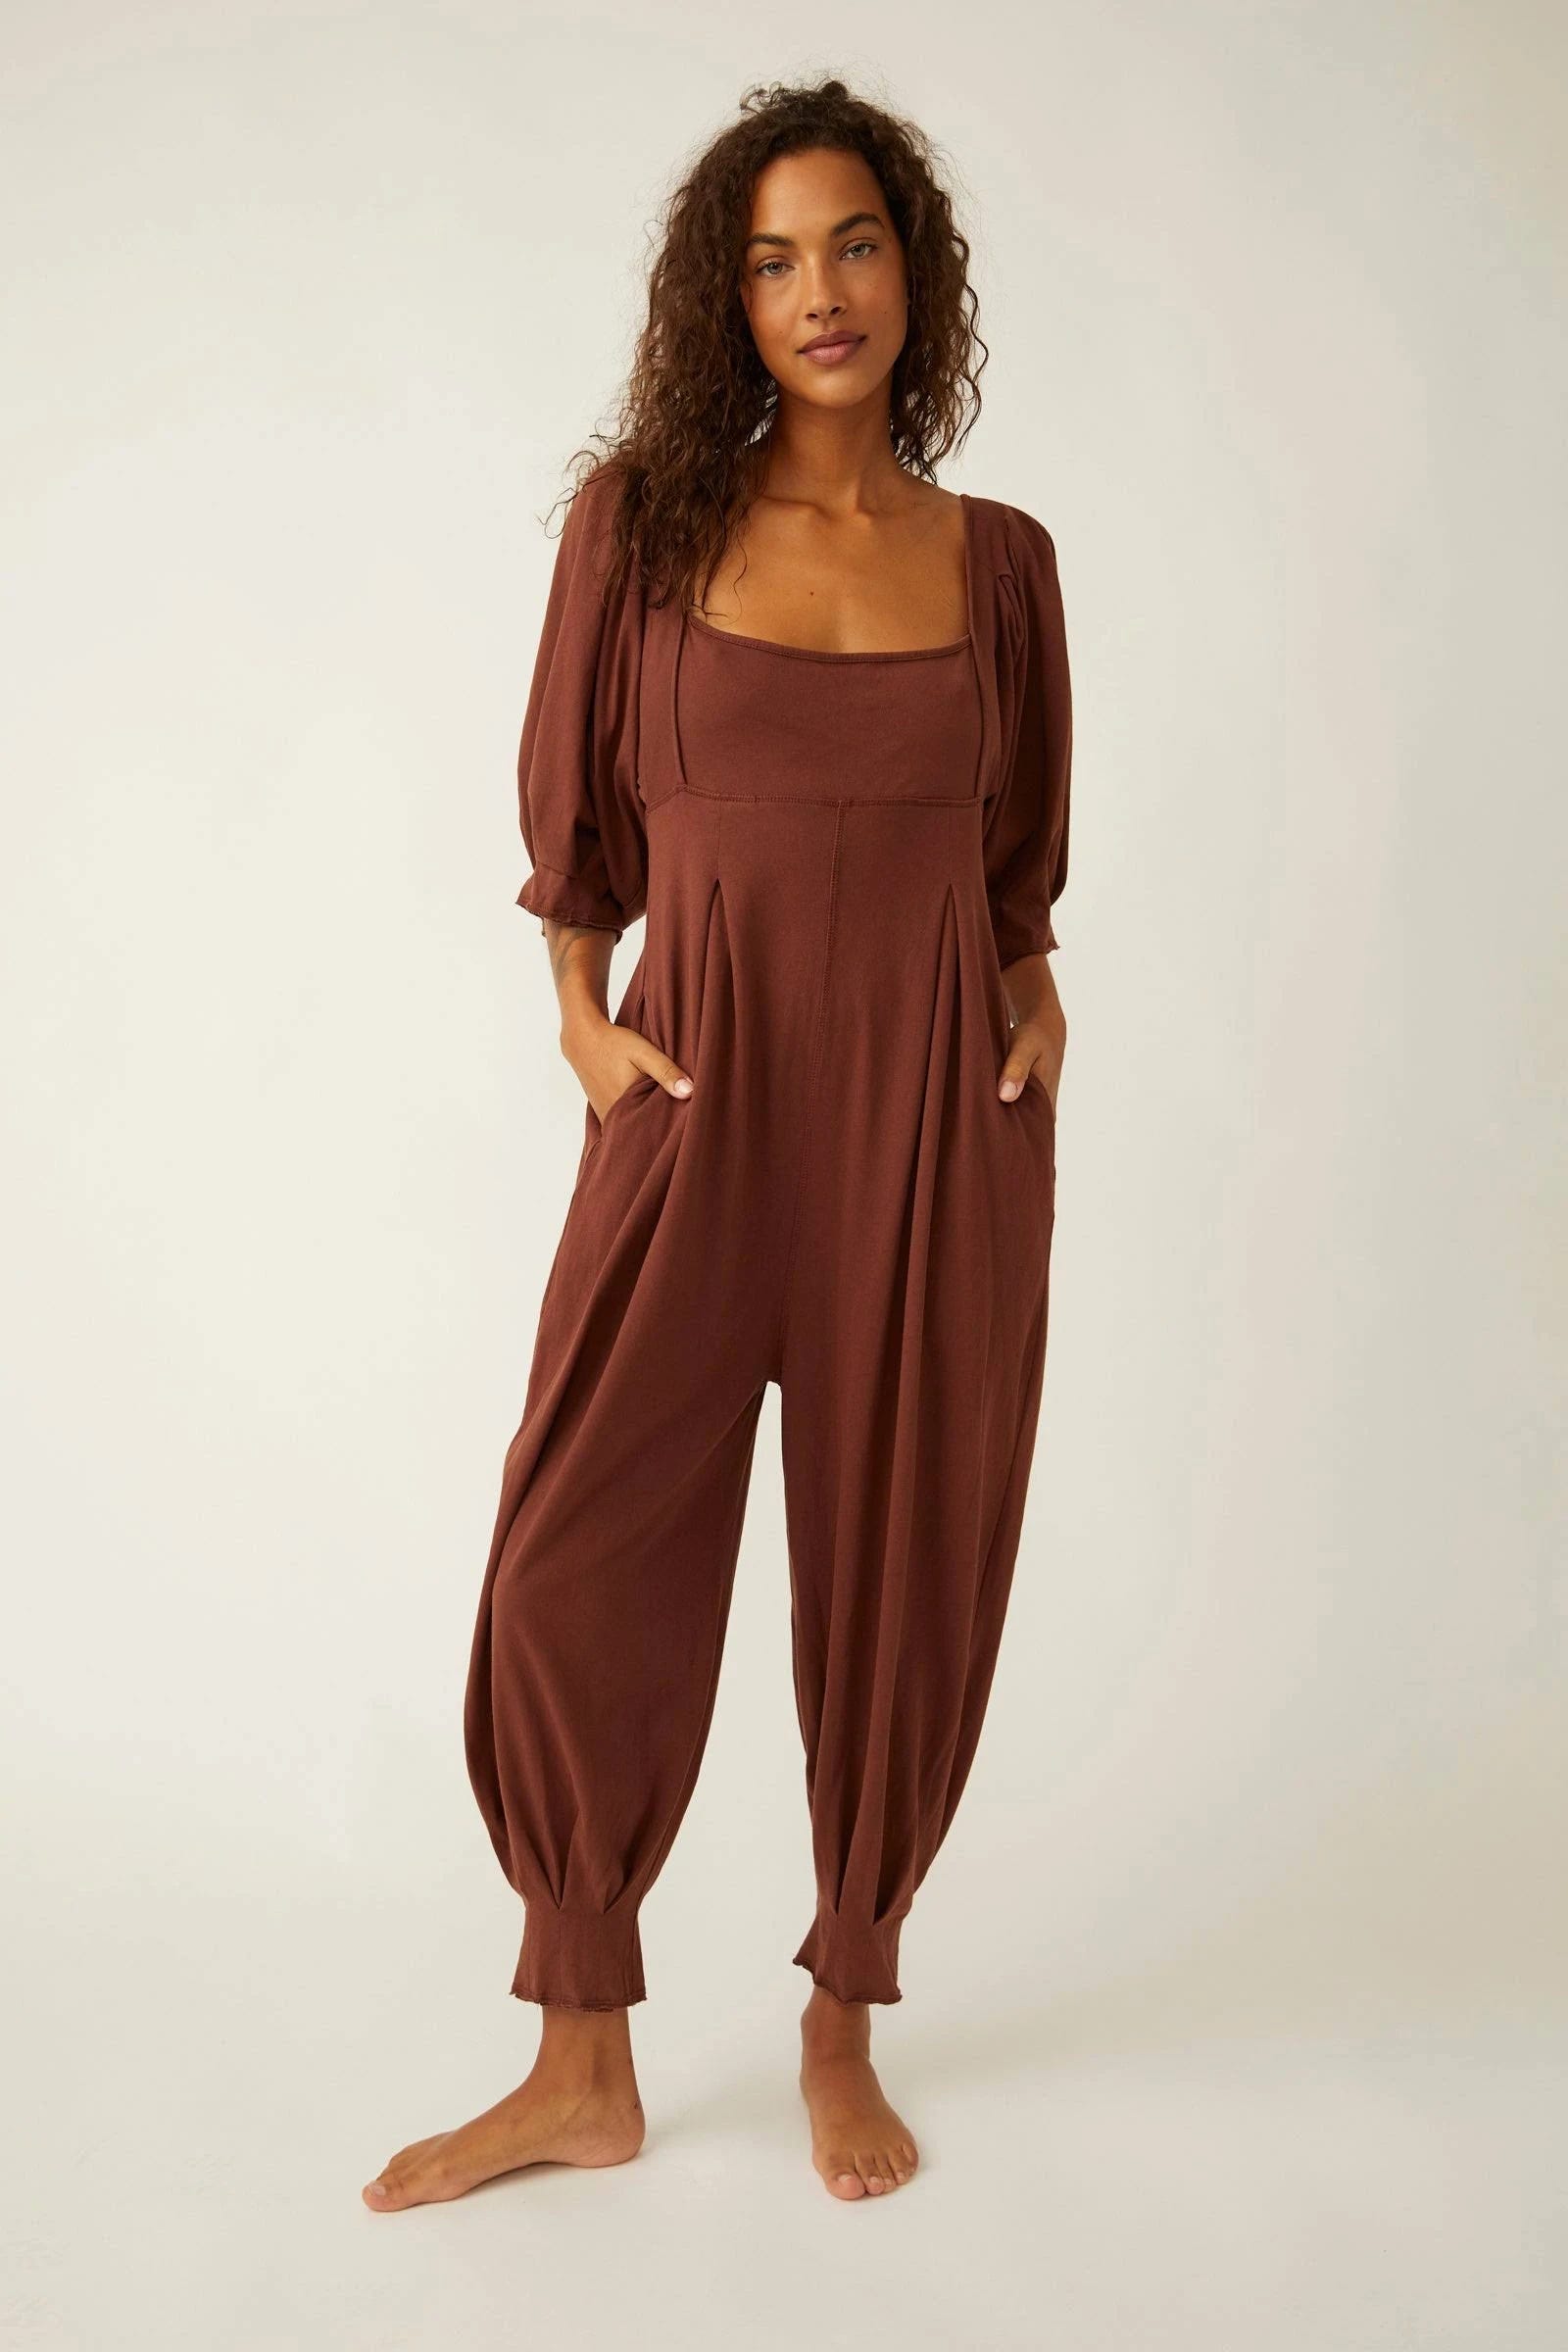 Lotta Love Brown Jumpsuit with Volume Sleeves and Soft Square Neckline | Image